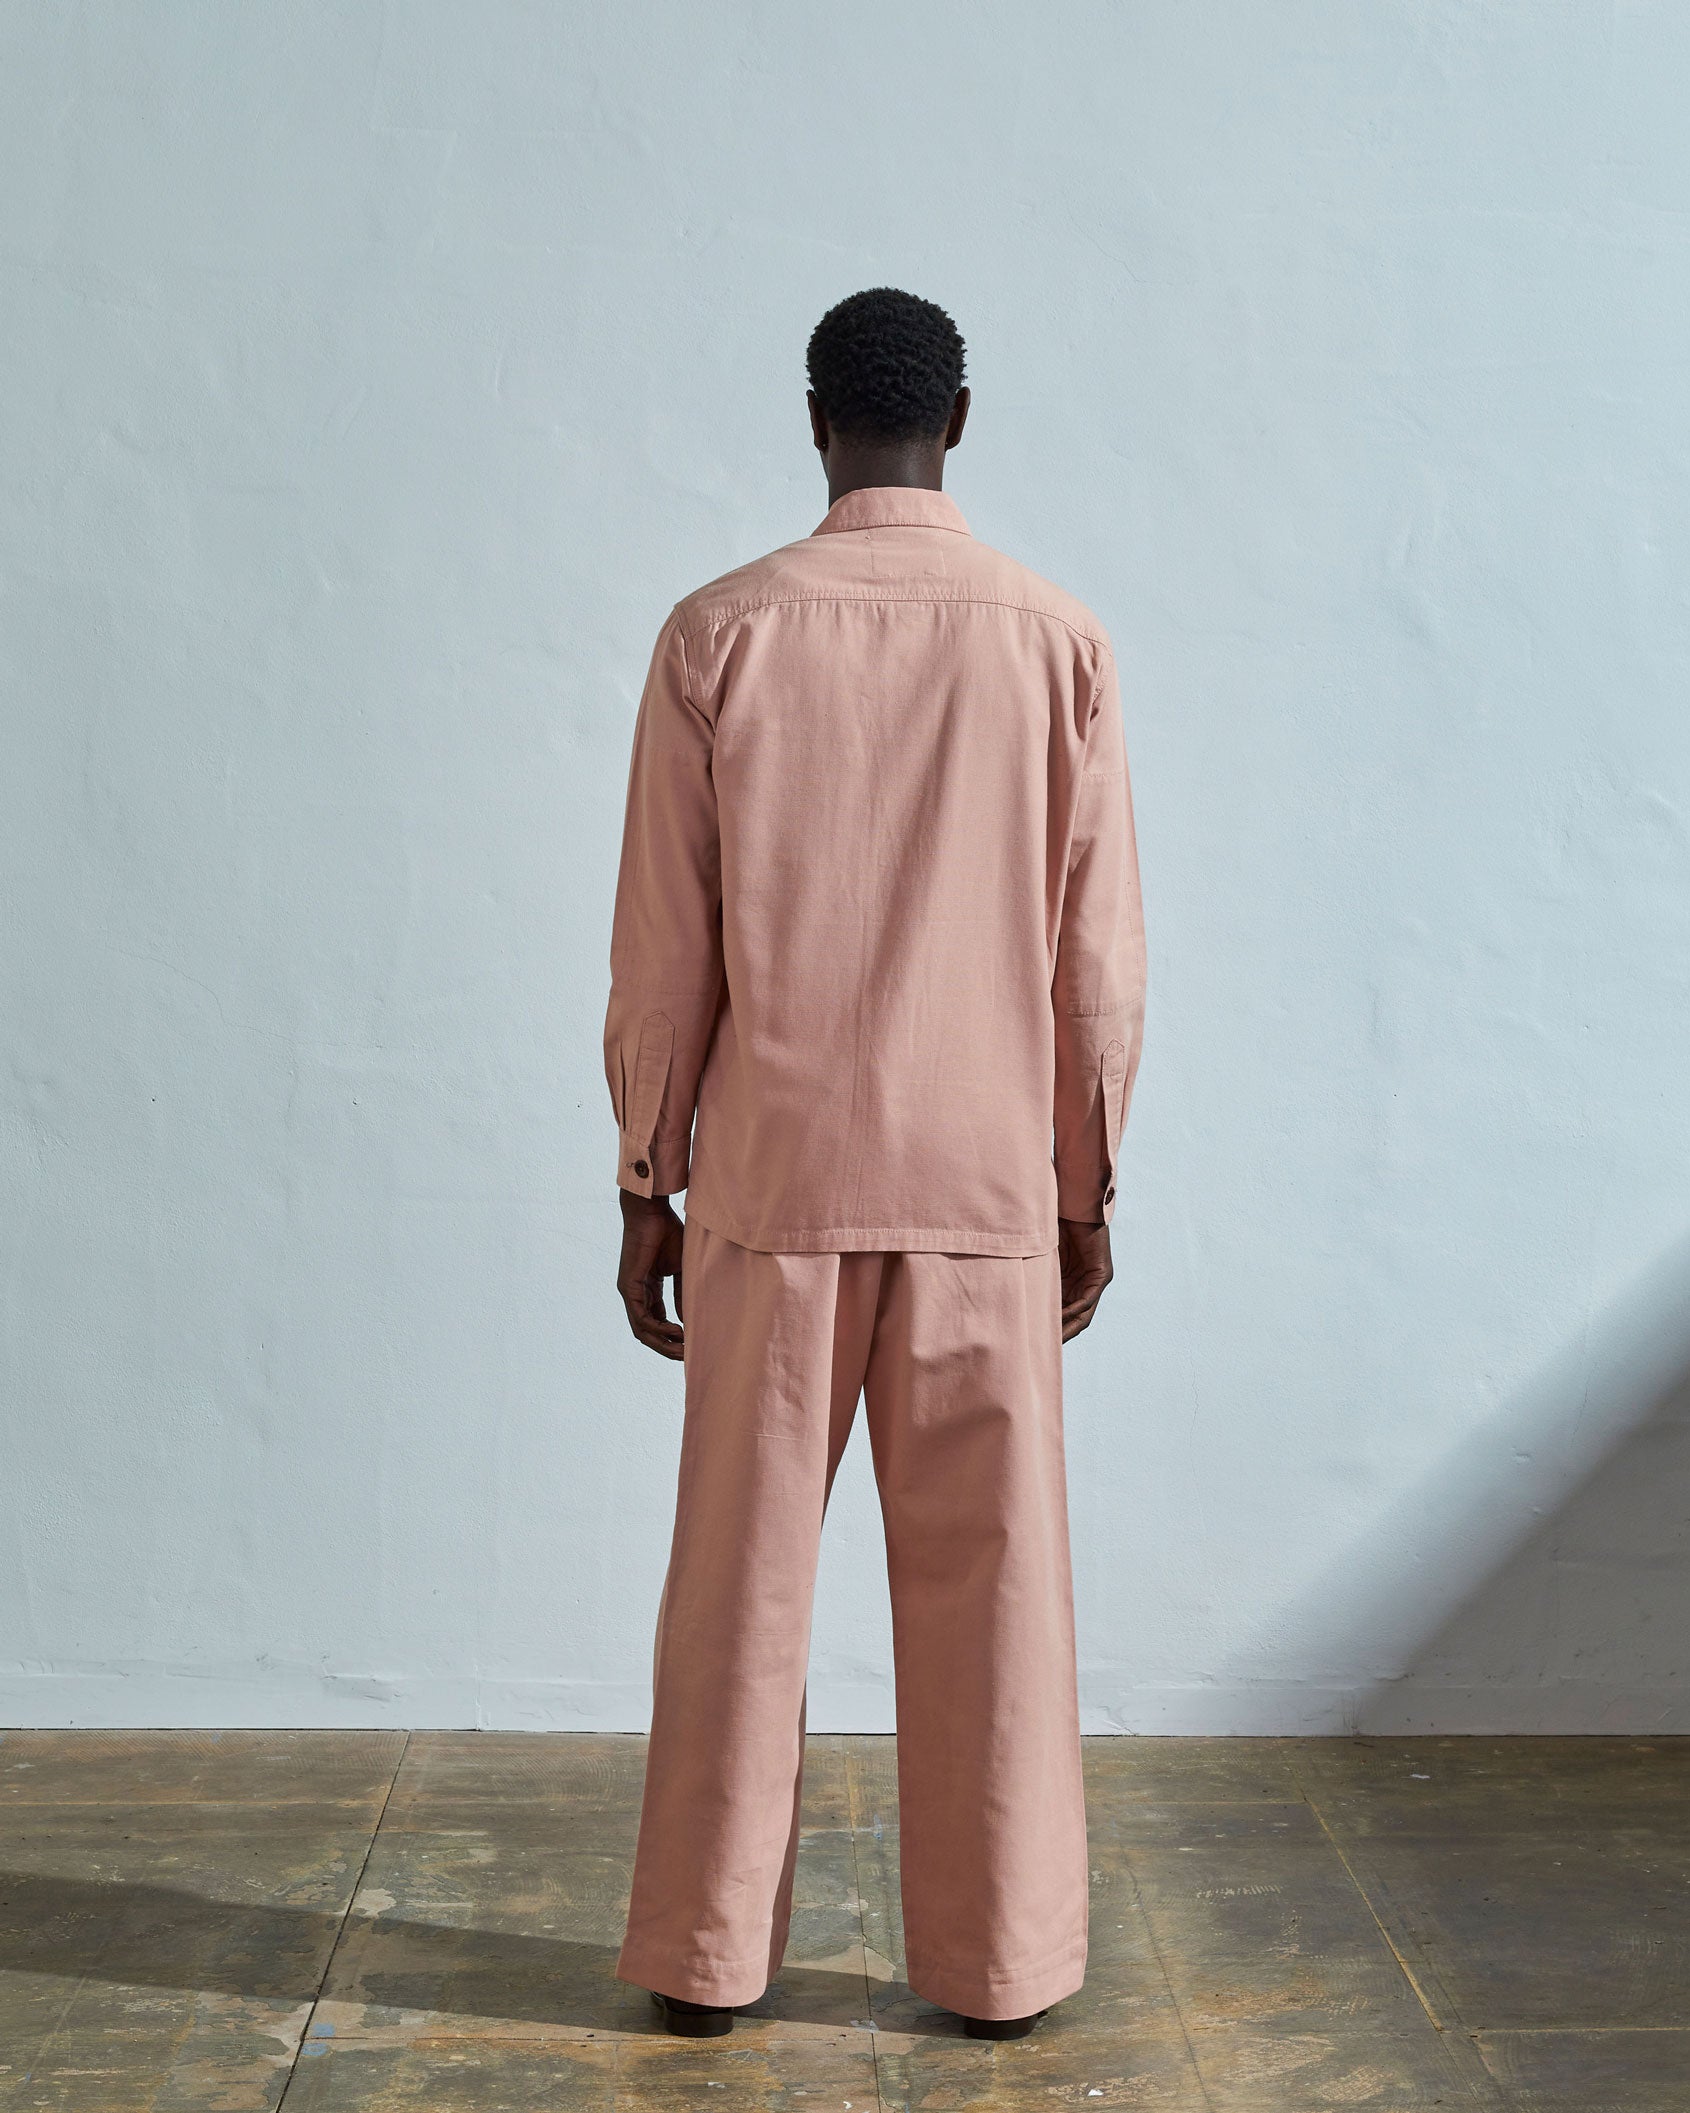 Back view of model wearing Uskees #3003 men's dusty pink workshirt showing reinforced elbow area and corozo buttoned cuffs.